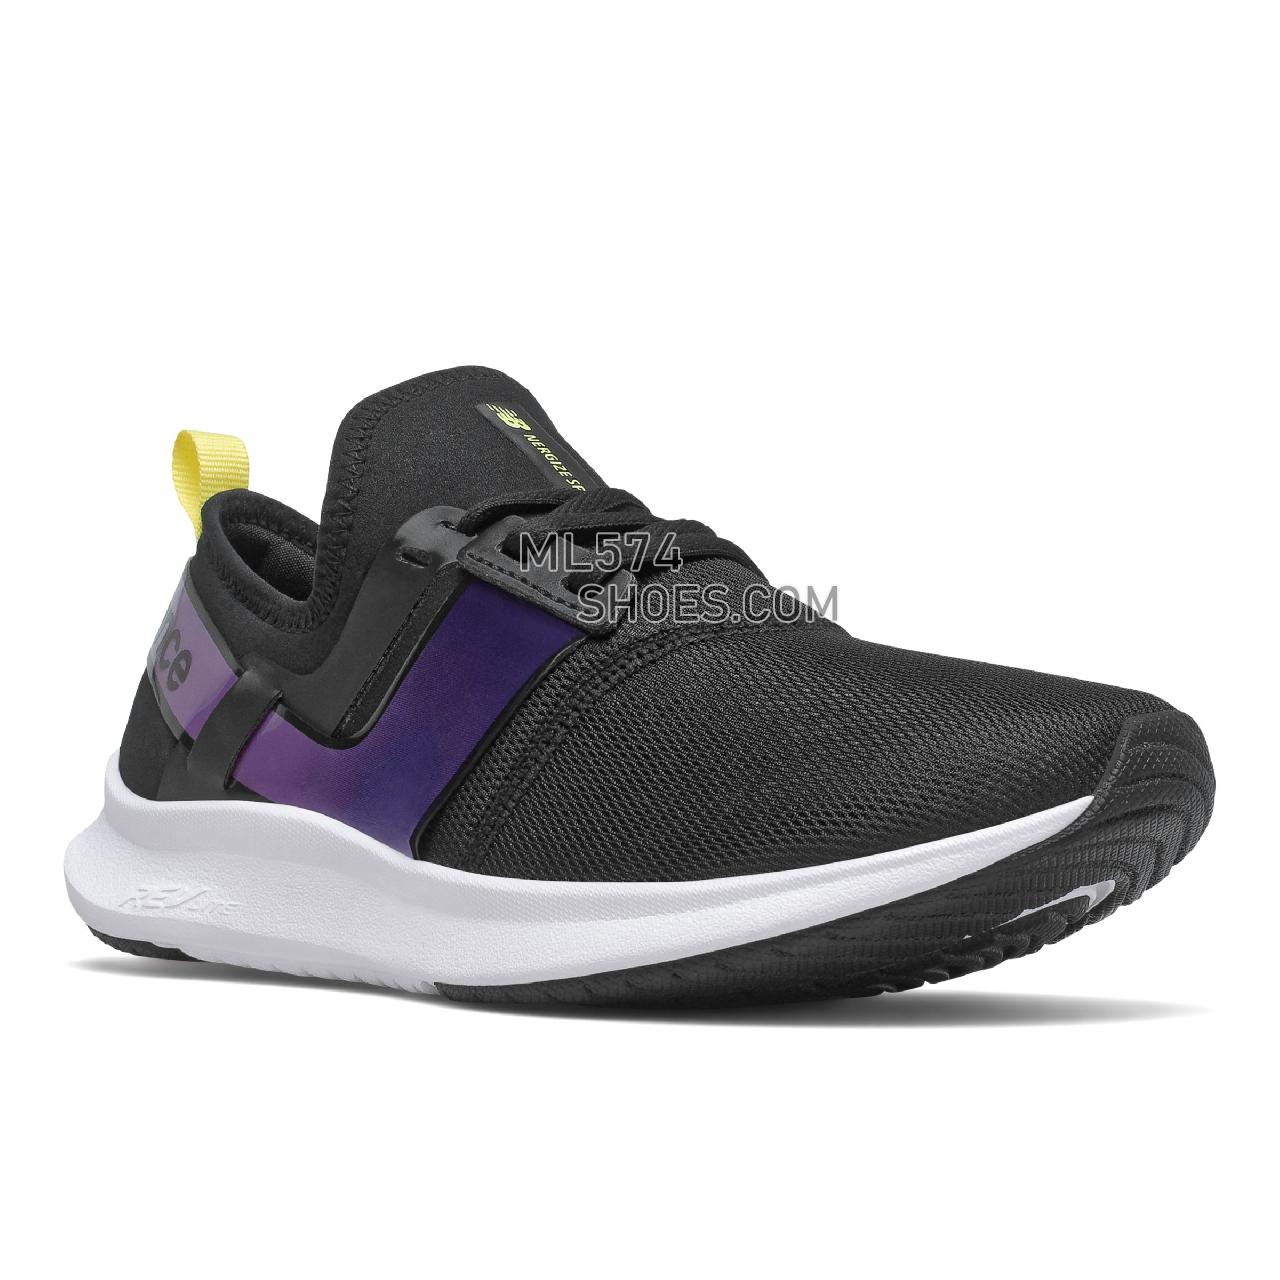 New Balance NB Nergize Sport - Women's Sport Style Sneakers - Black with Virtual Violet - WNRGSCR1